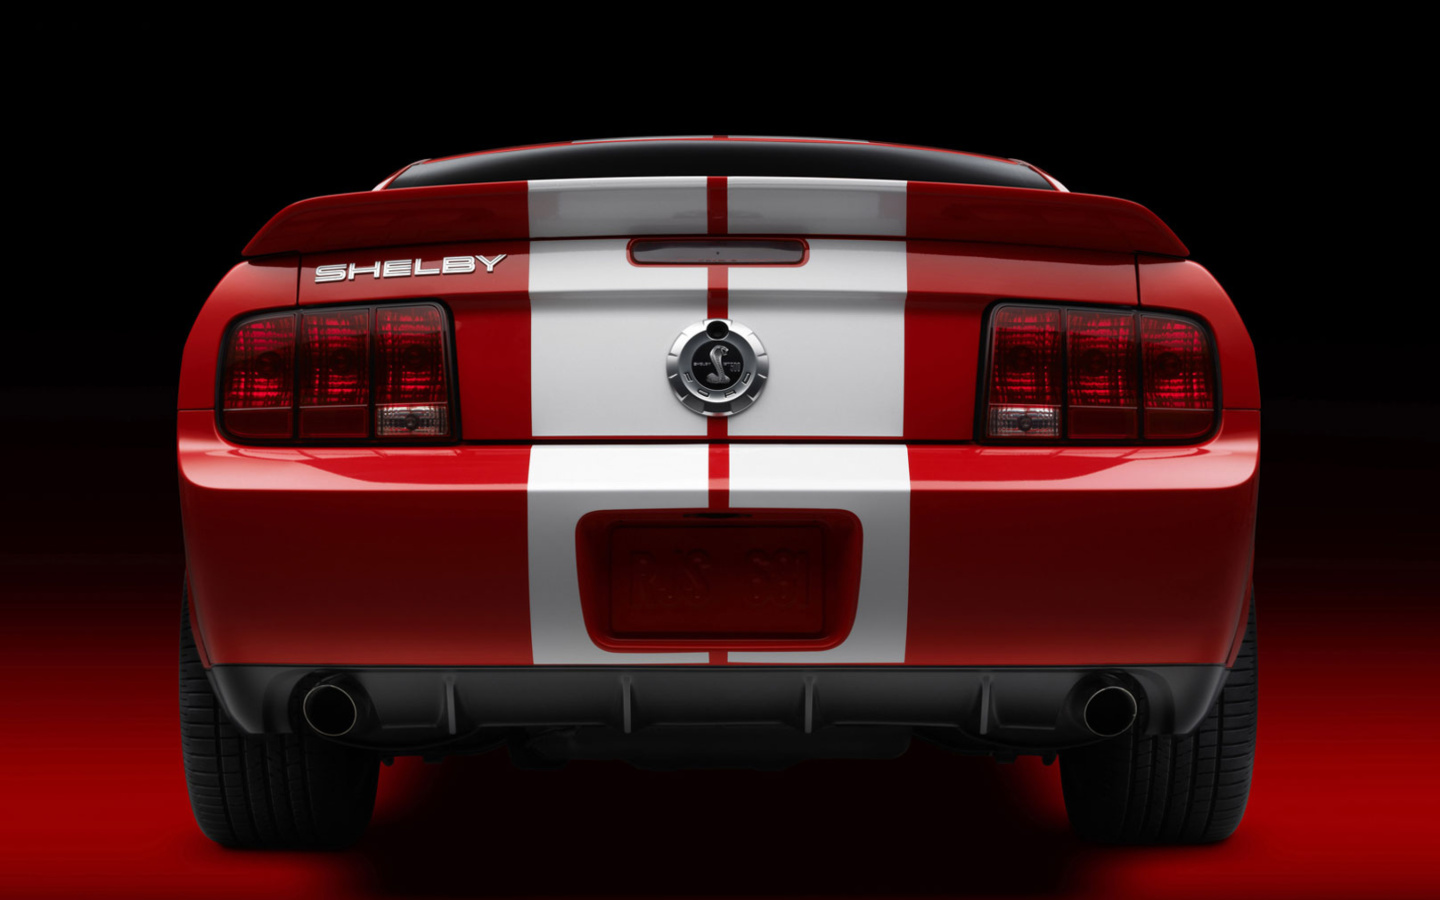 Ford Mustang Shelby GT500 wallpaper 1440x900